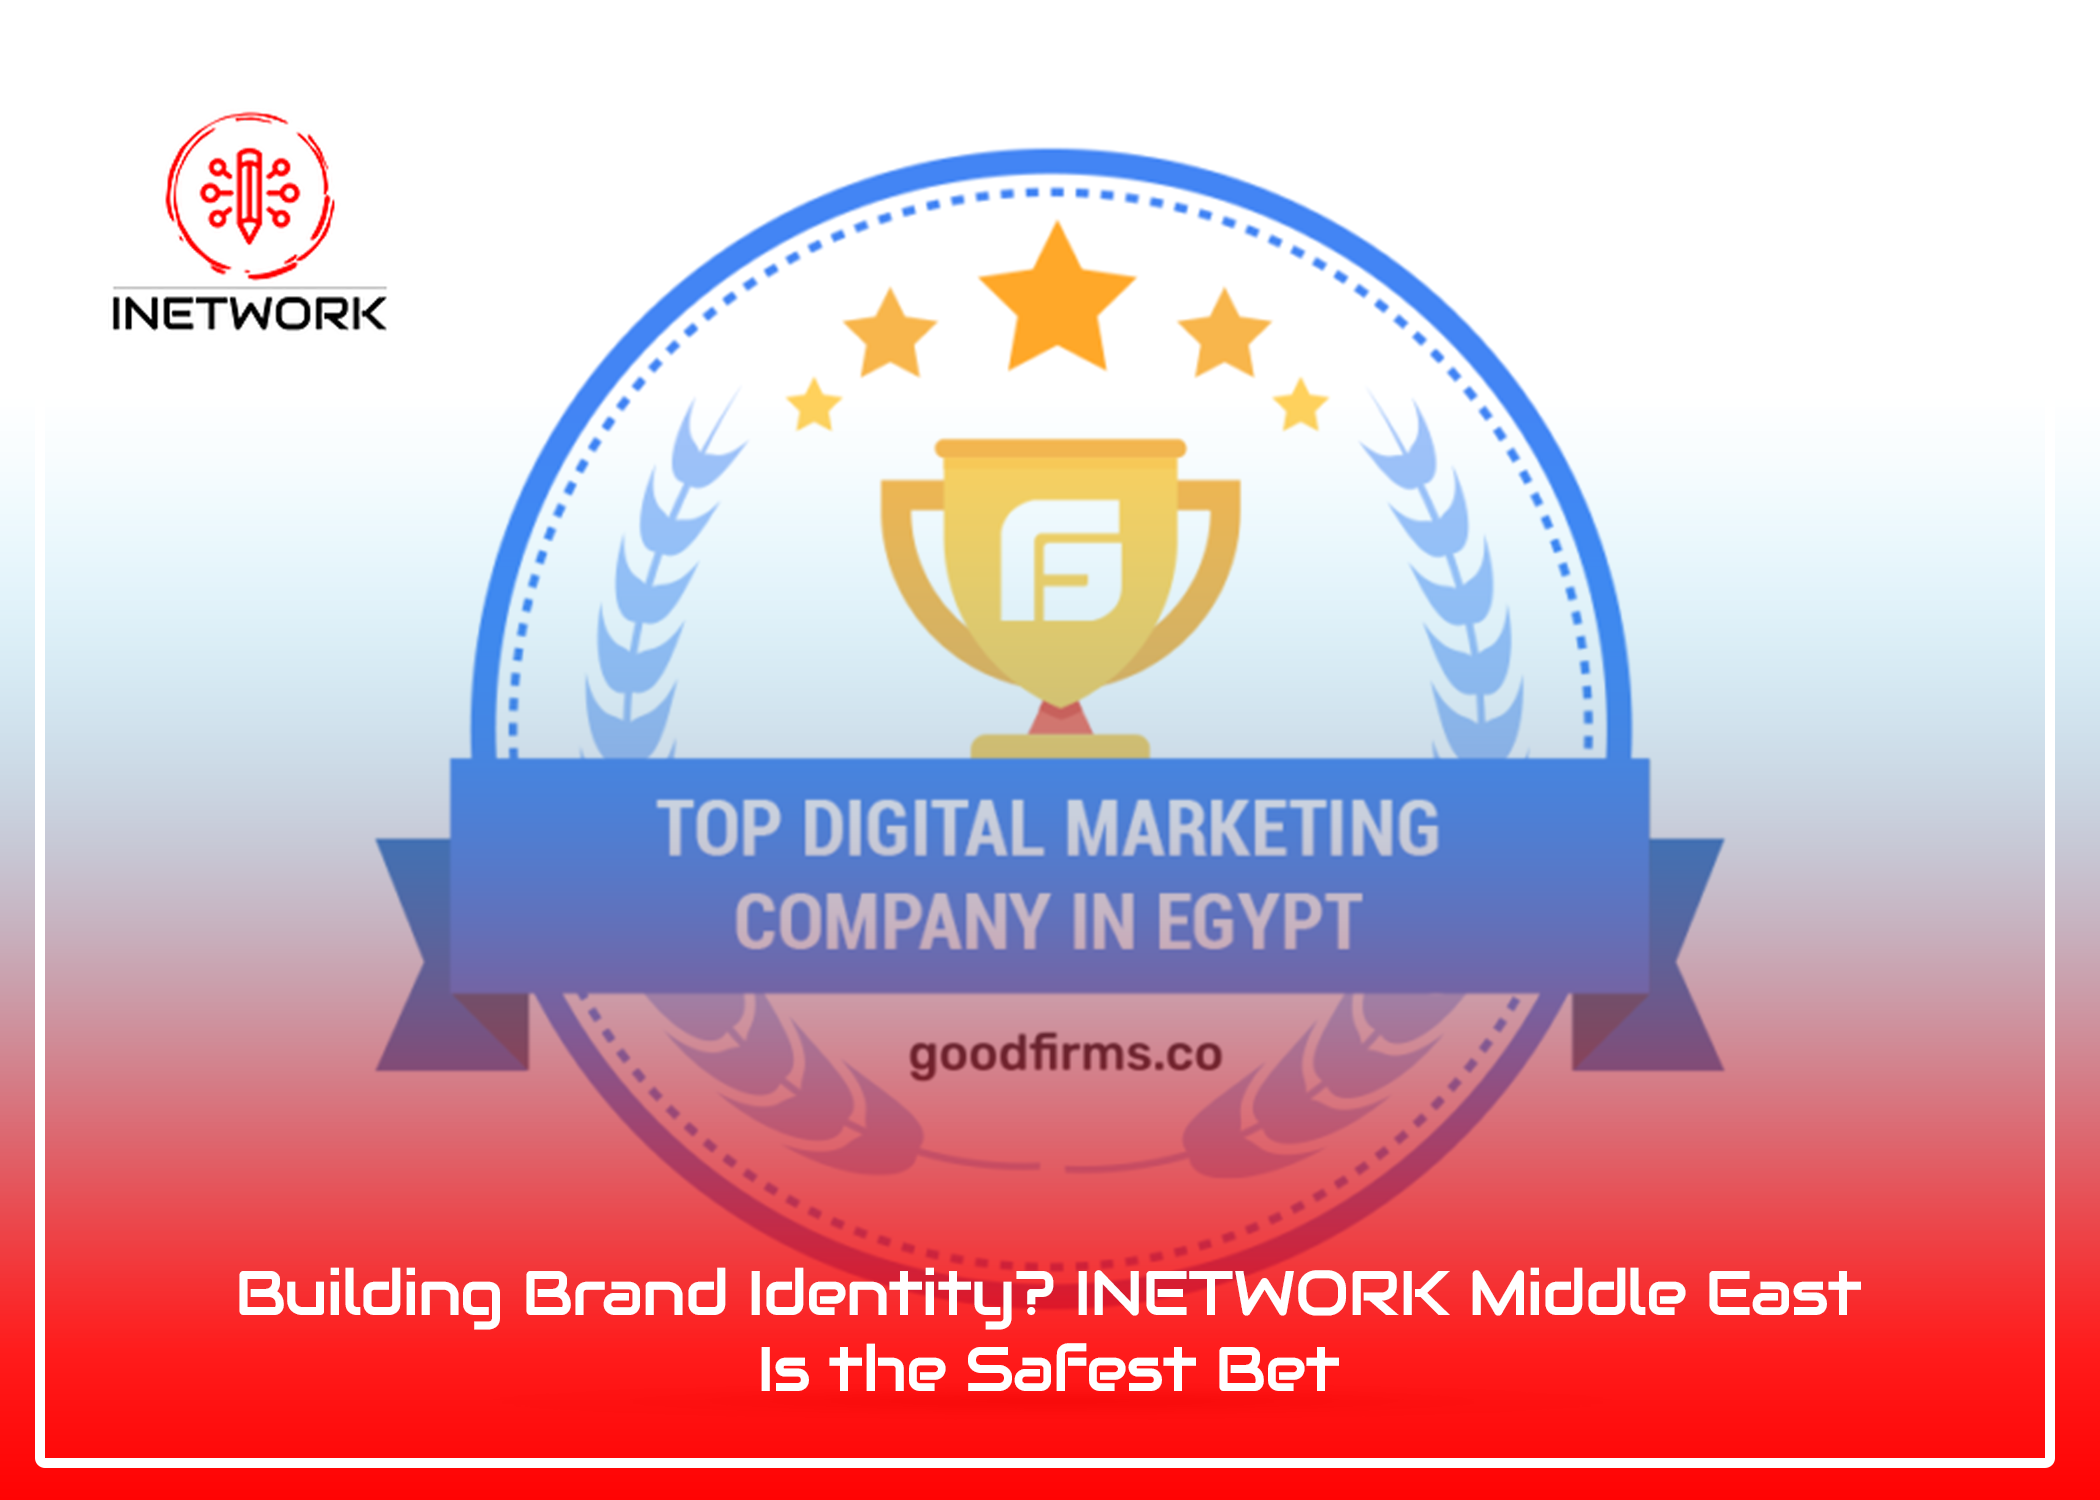 Building Brand Identity? INETWORK Middle East Is the Safest Bet